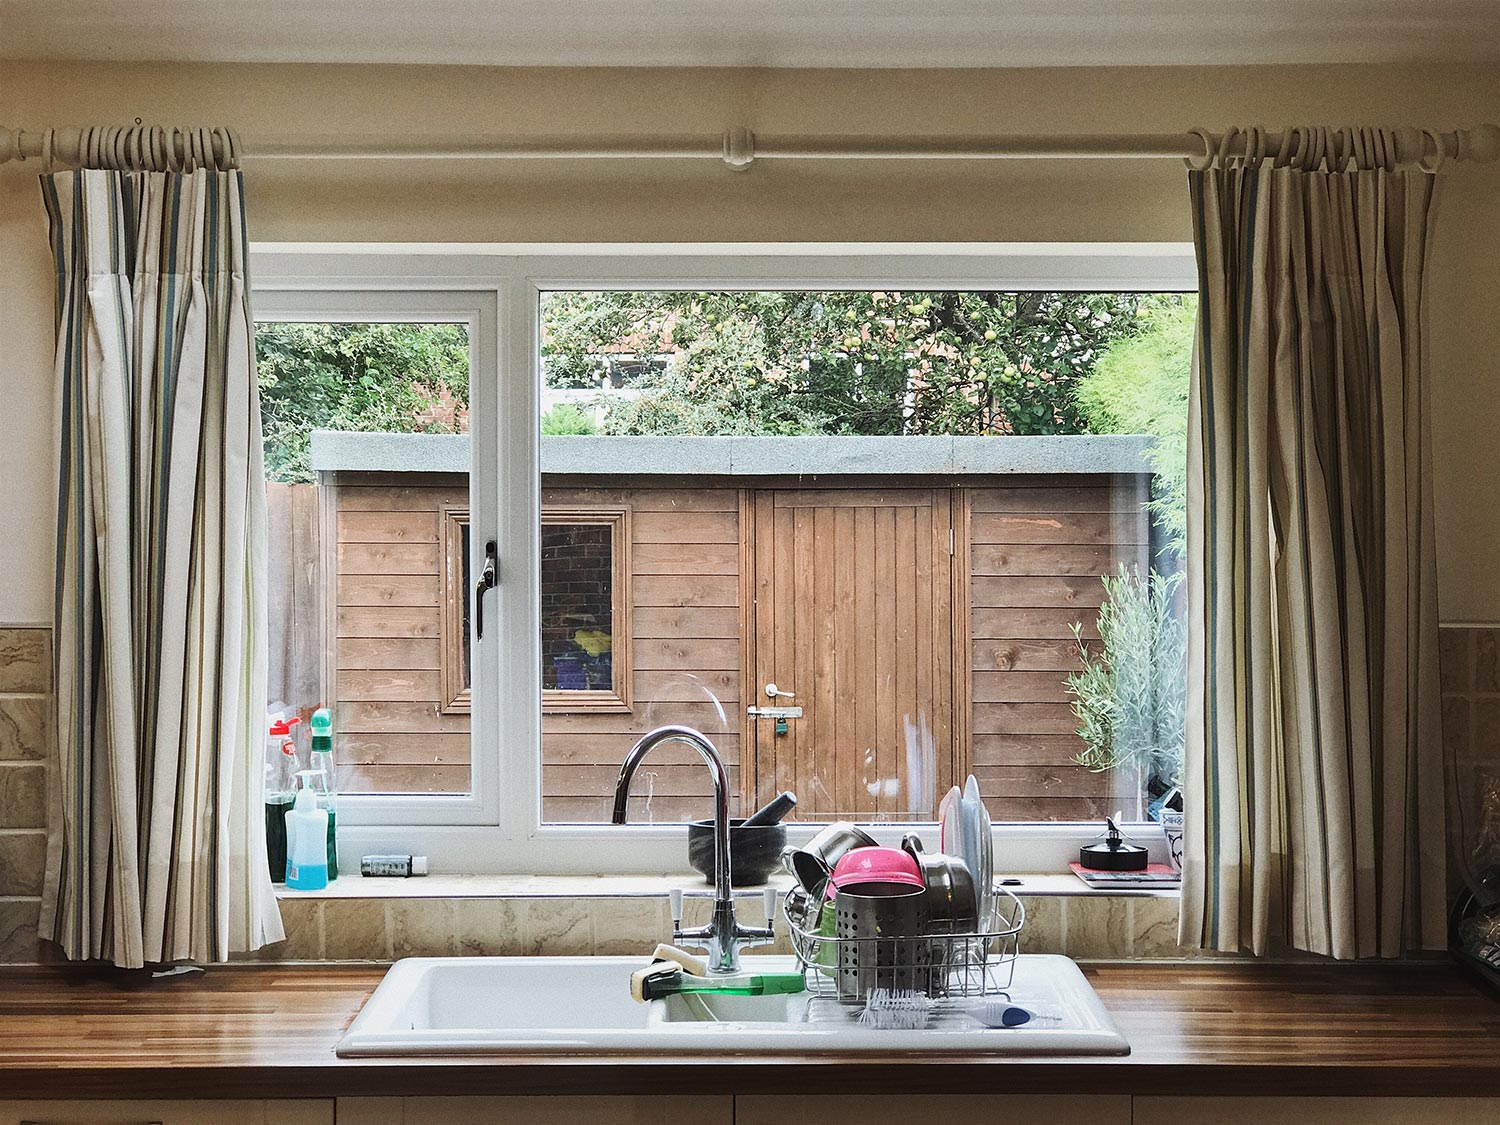 A view through an English kitchen window with dishes are washed and stacked